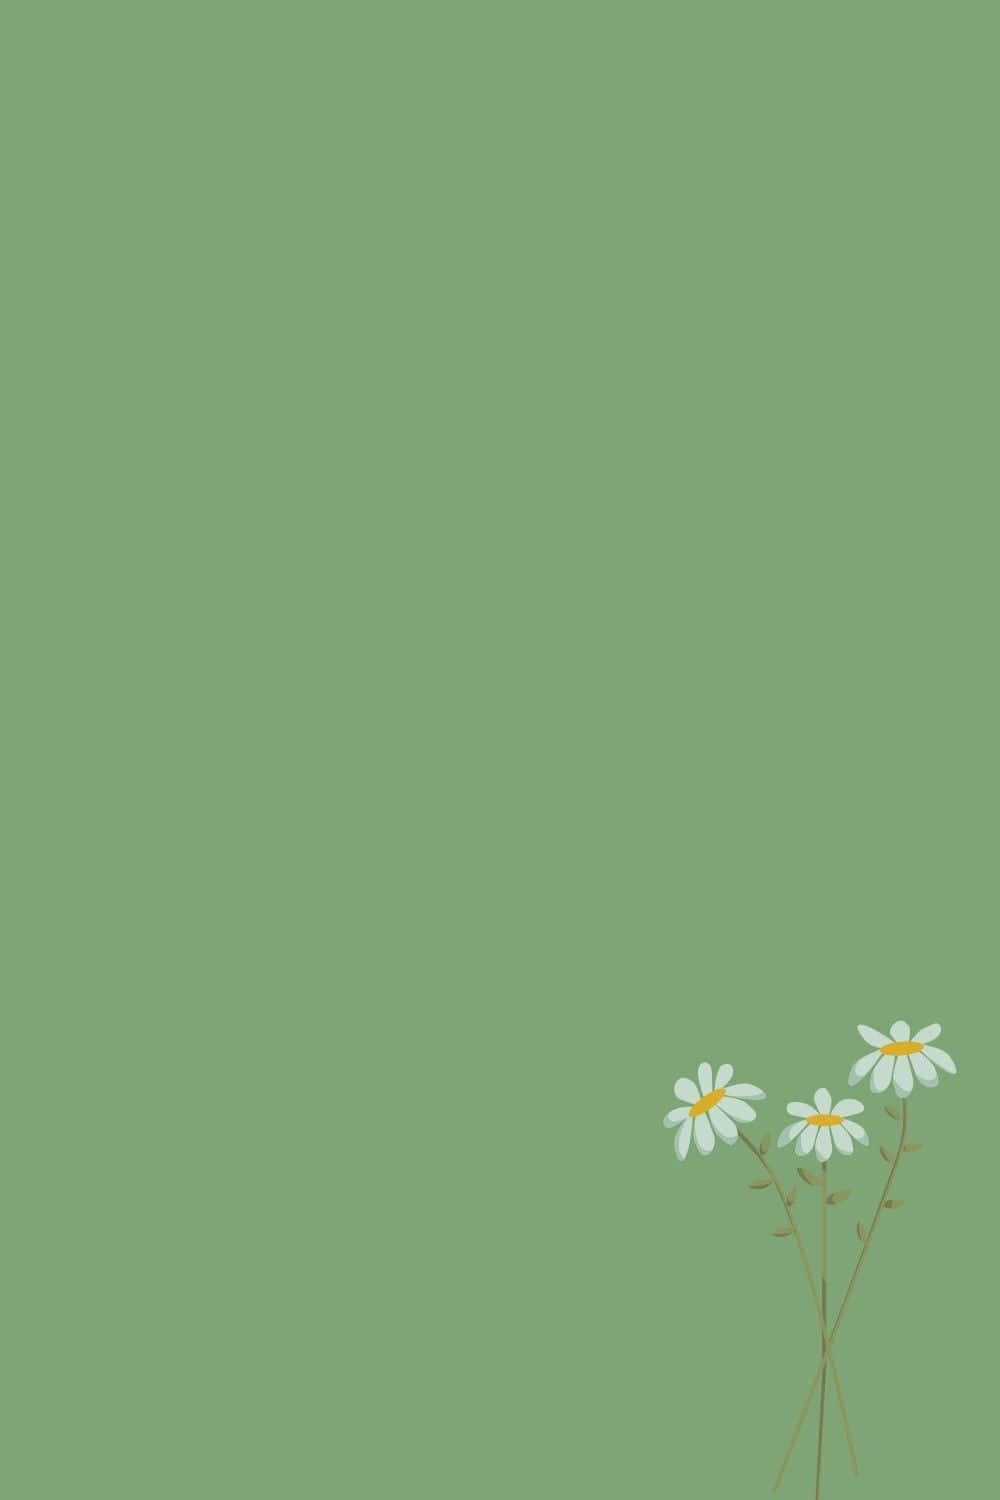 White Common Daisy Against A Cute Sage Green Backdrop Wallpaper